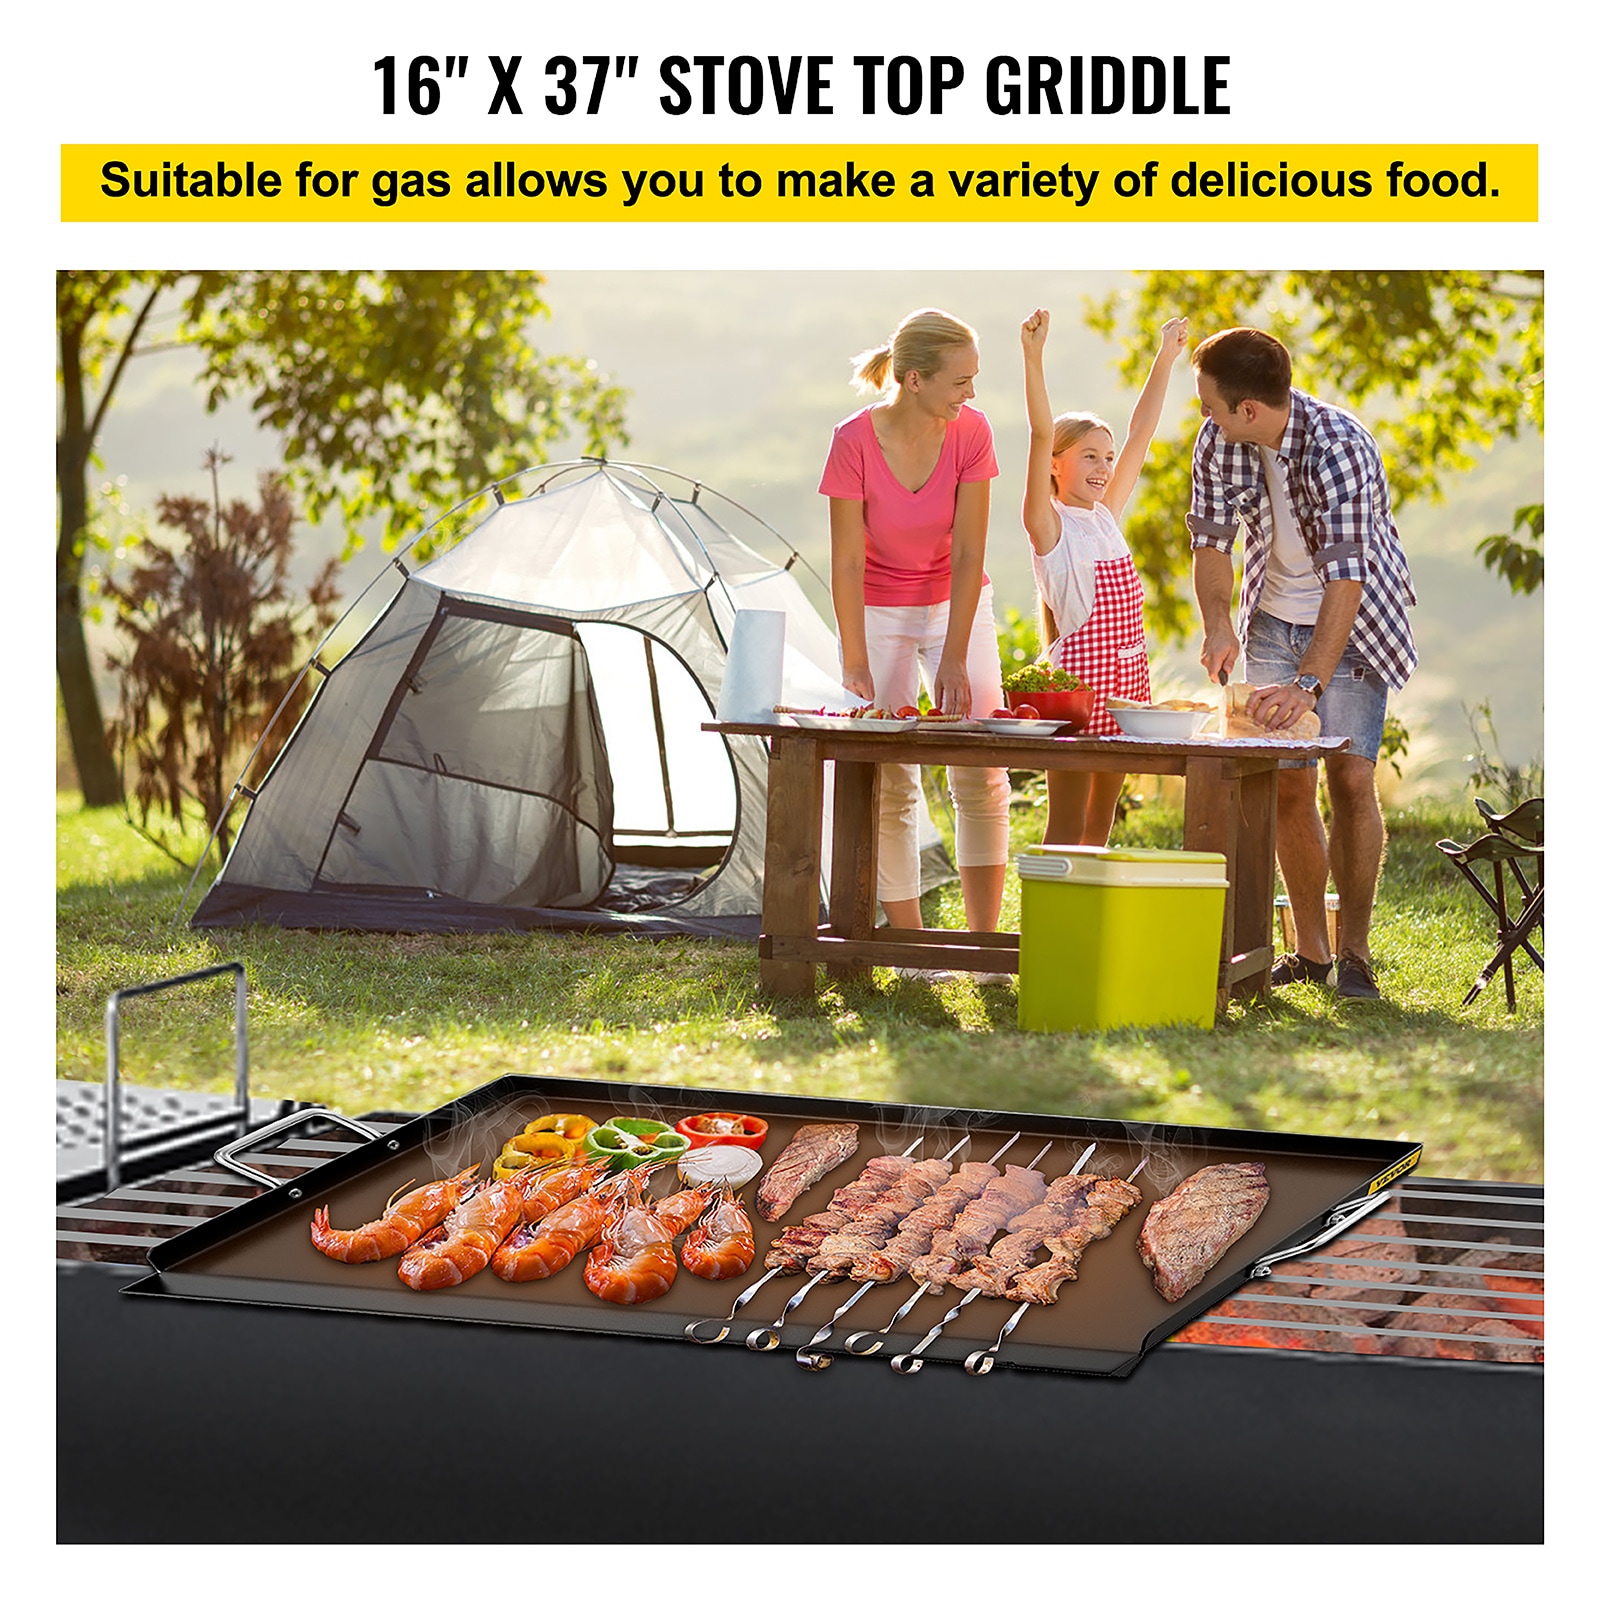 How To Season Stove Top Griddle